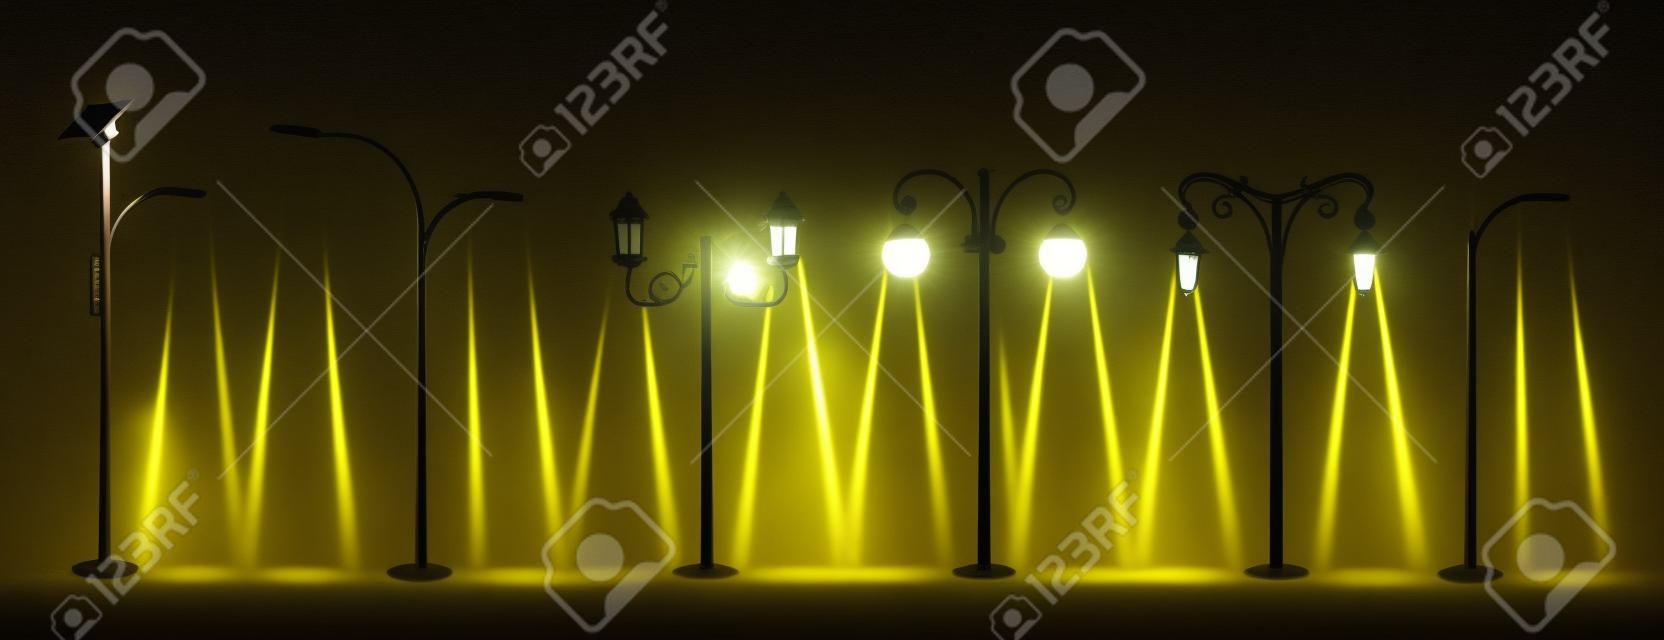 Various types of street light night lantern. street lights glowing in darkness yellow warm and cold white light.